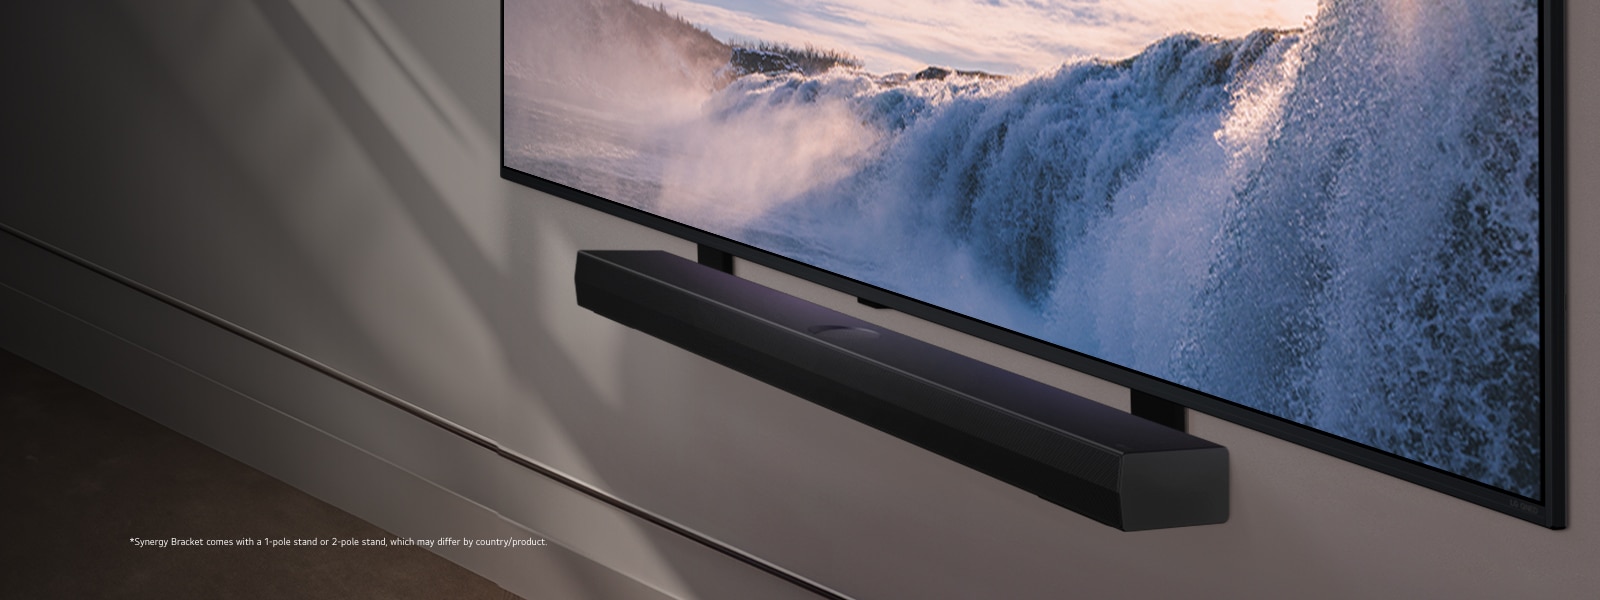 LG TV and Soundbar are placed within an angled perspective mounted on a wall. On the TV, a close up of a vast waterfall is displayed, and soft sunlight cascade over the wall, TV, and soundbar.